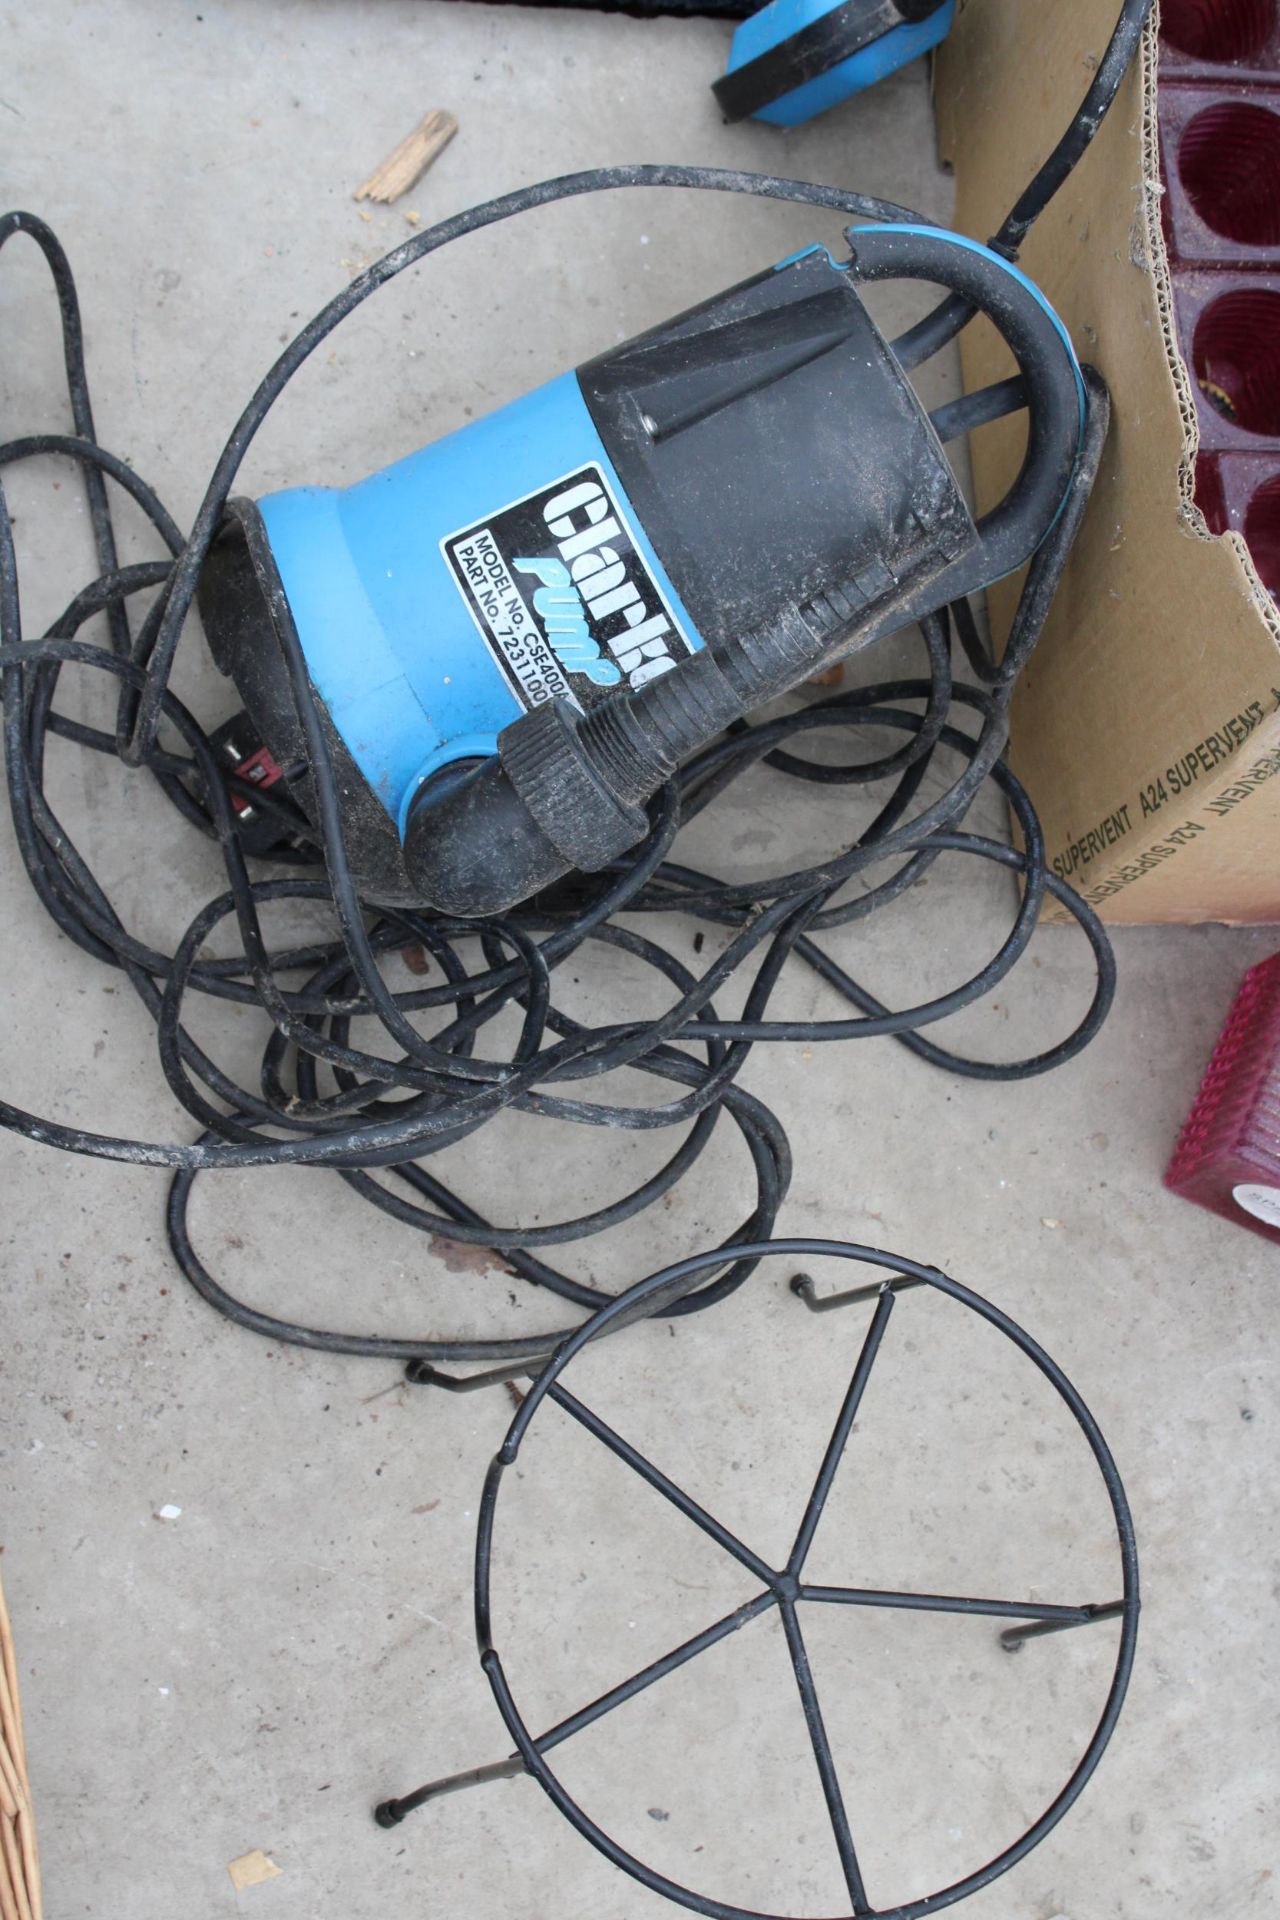 A CLRKE ELECTRIC SUBMERSIBLE PUMP - Image 2 of 2